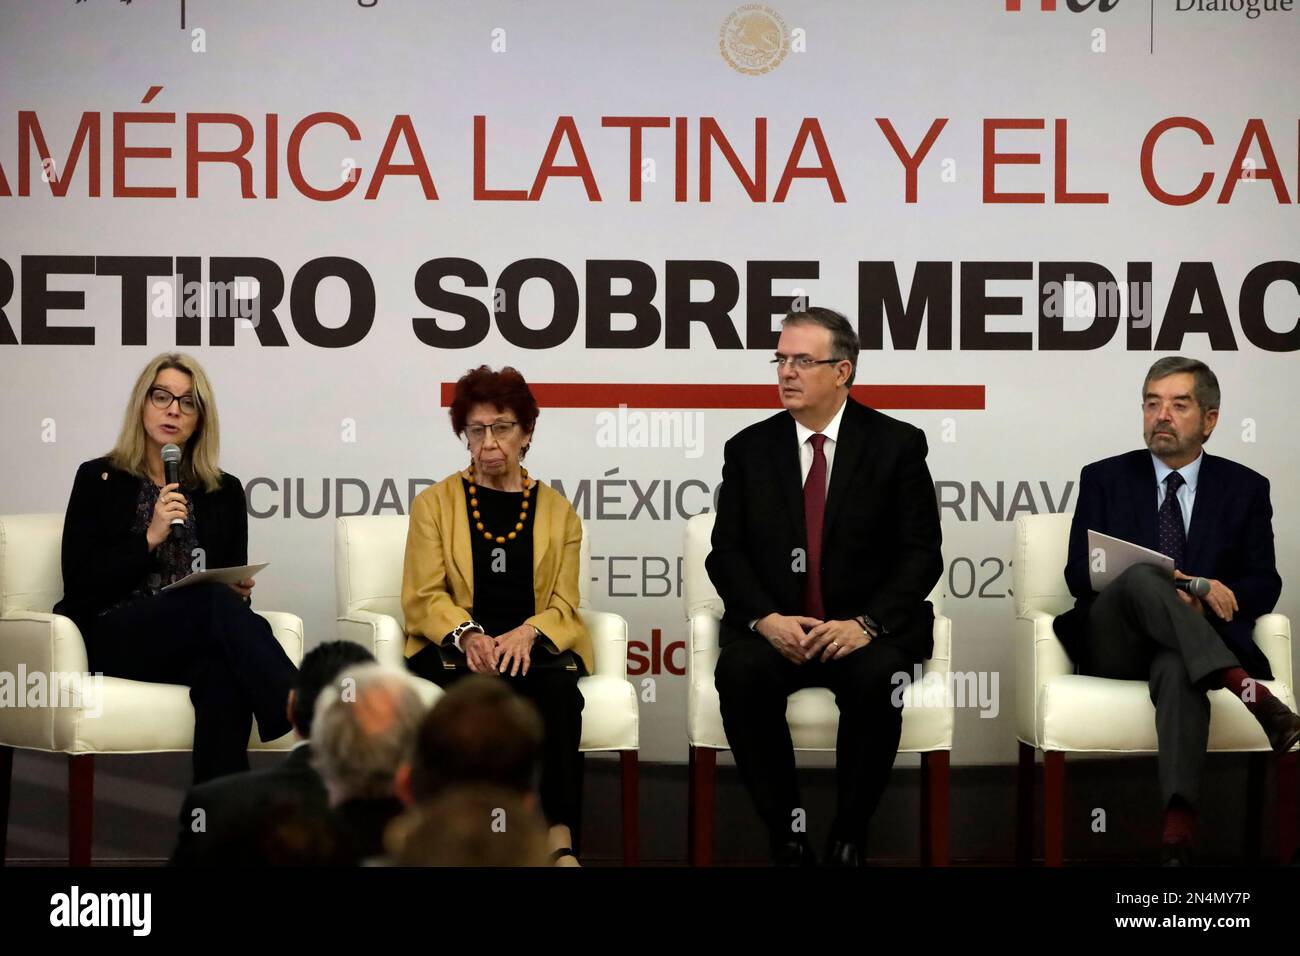 Mexico City, Mexico. 8th Feb, 2023. The Norwegian ambassador to Mexico, Ragnhild Imerslund; the Undersecretary of Foreign Relations of Mexico, Carmen Moreno Toscano; the foreign minister of Mexico, Marcelo Ebrard and the representative of Mexico to the United Nations, Juan Ramon de la Fuente at the inauguration of the Retreat on Mediation ''Latin America and the Caribbean'' at the Ministry of Foreign Affairs in Mexico City. Credit: ZUMA Press, Inc./Alamy Live News Stock Photo